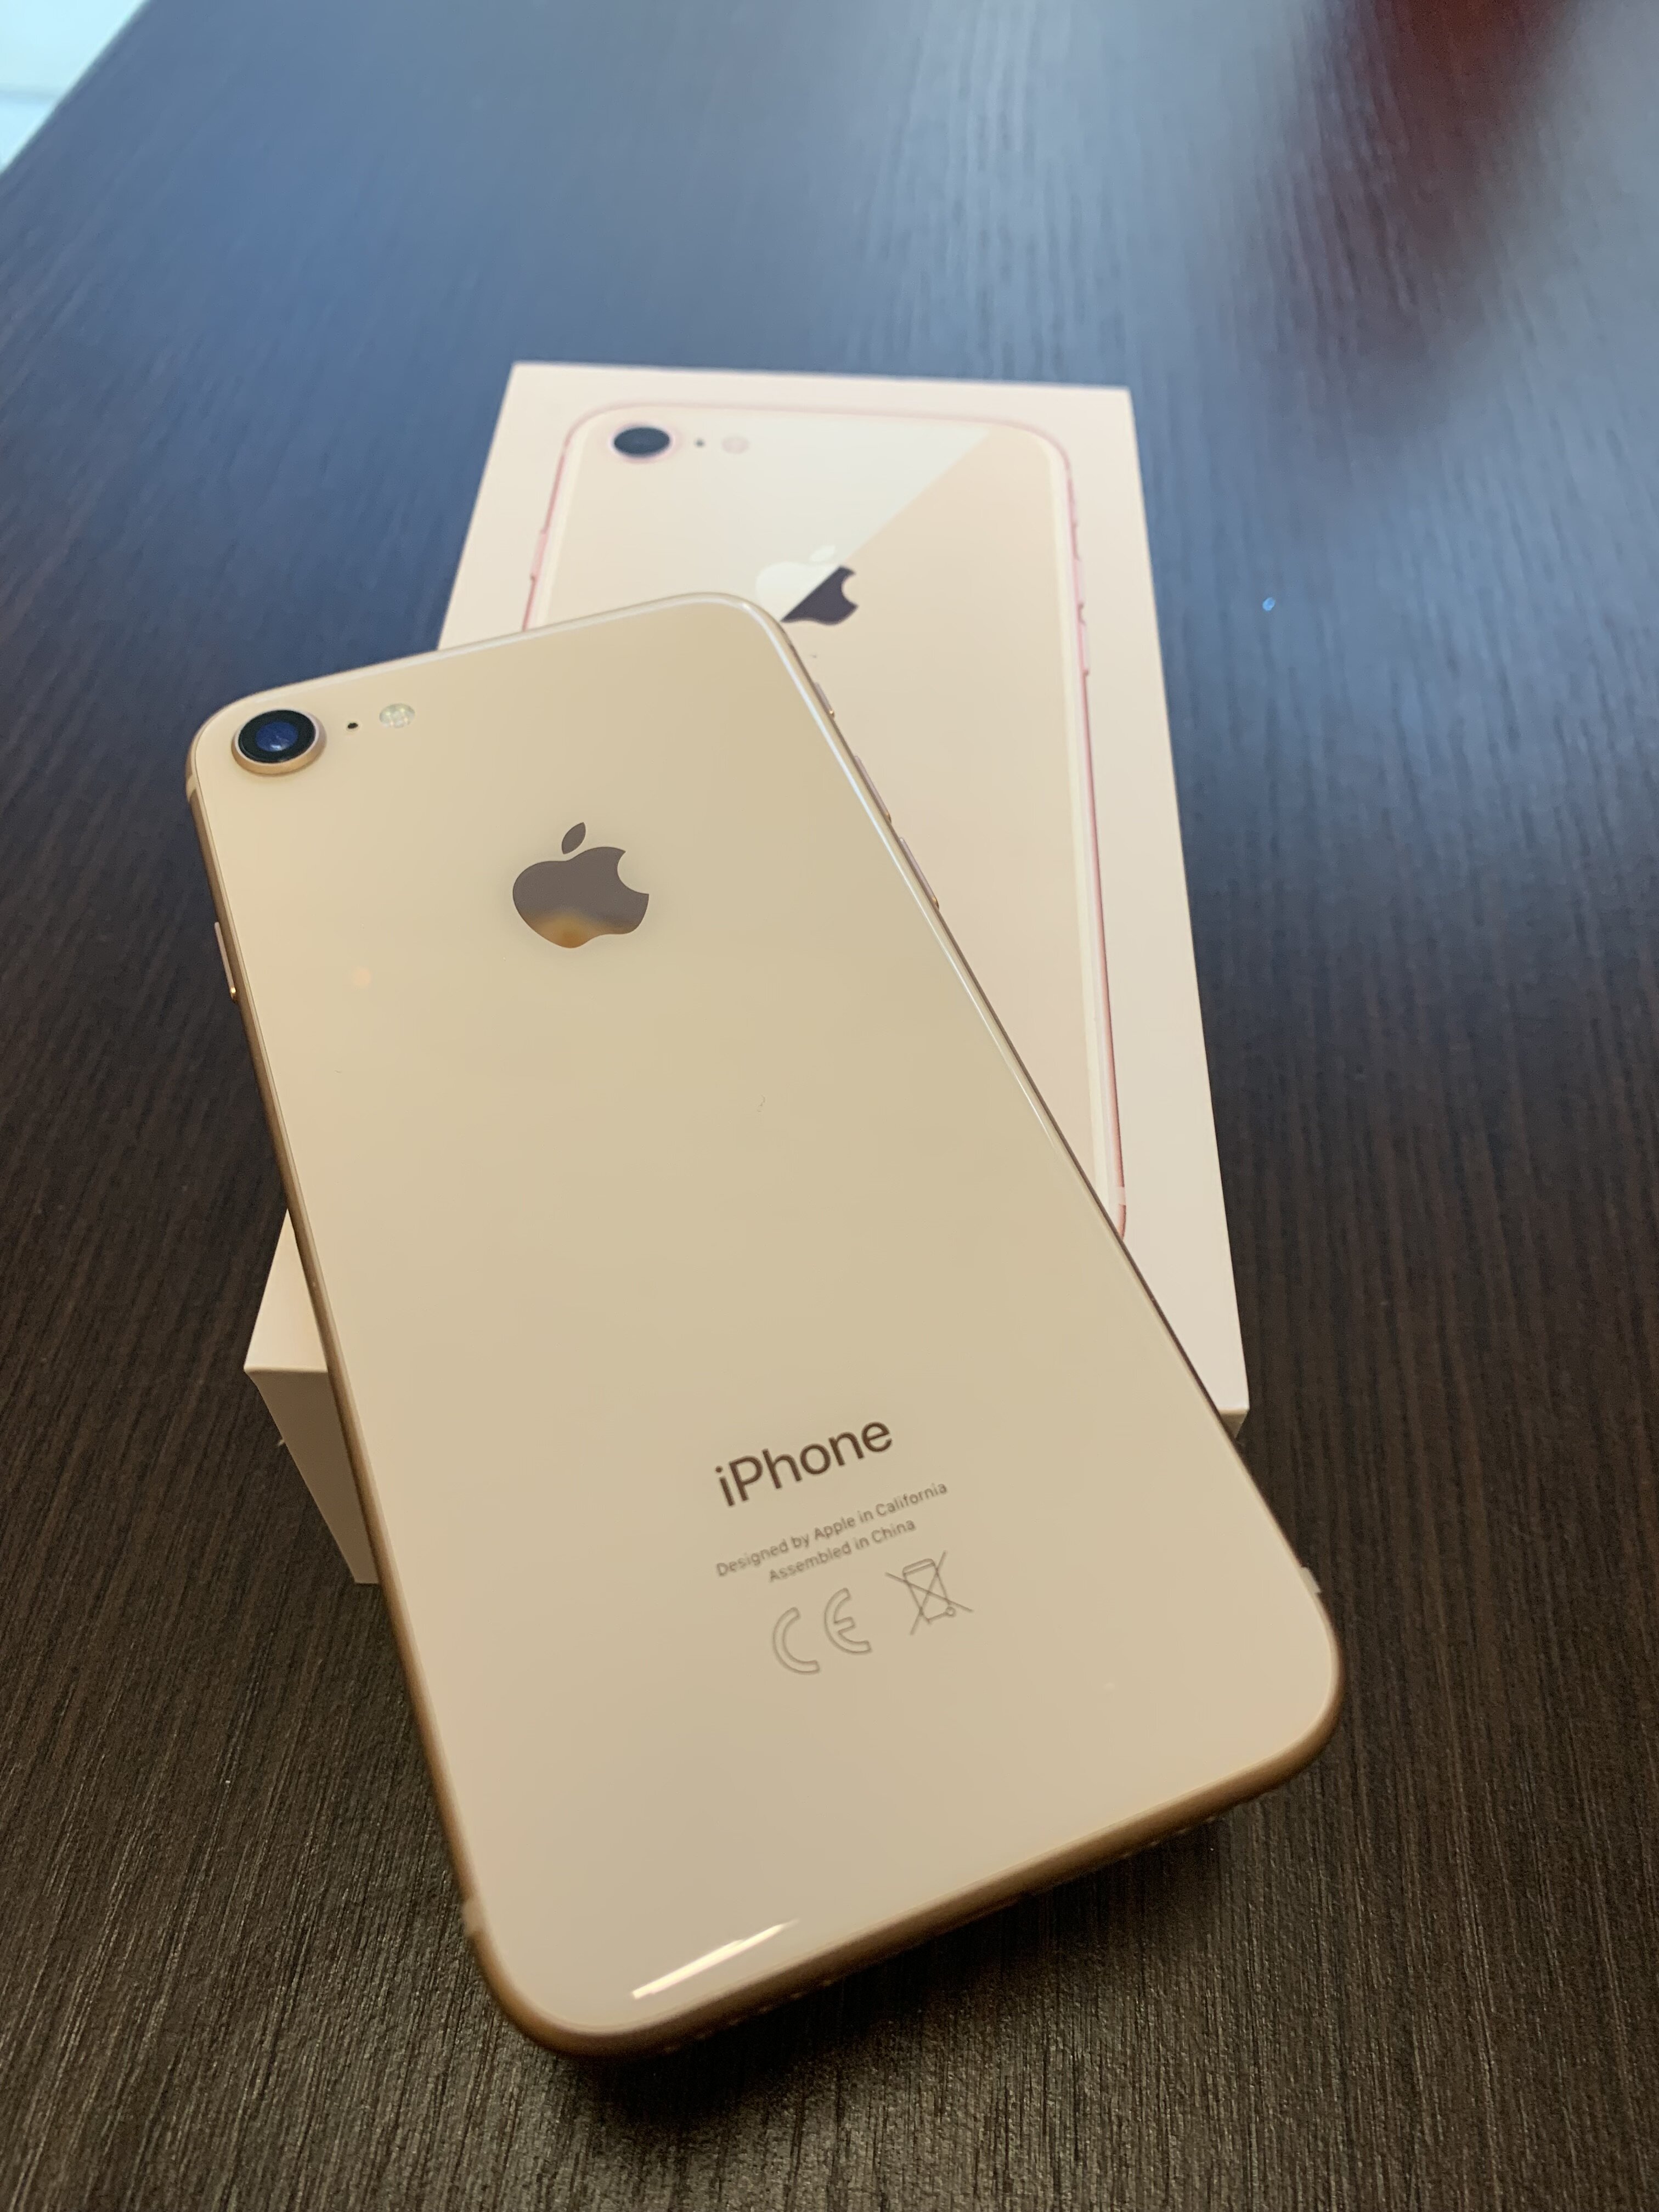 iPhone8 64gb gold - iPhone - Insomnia.gr